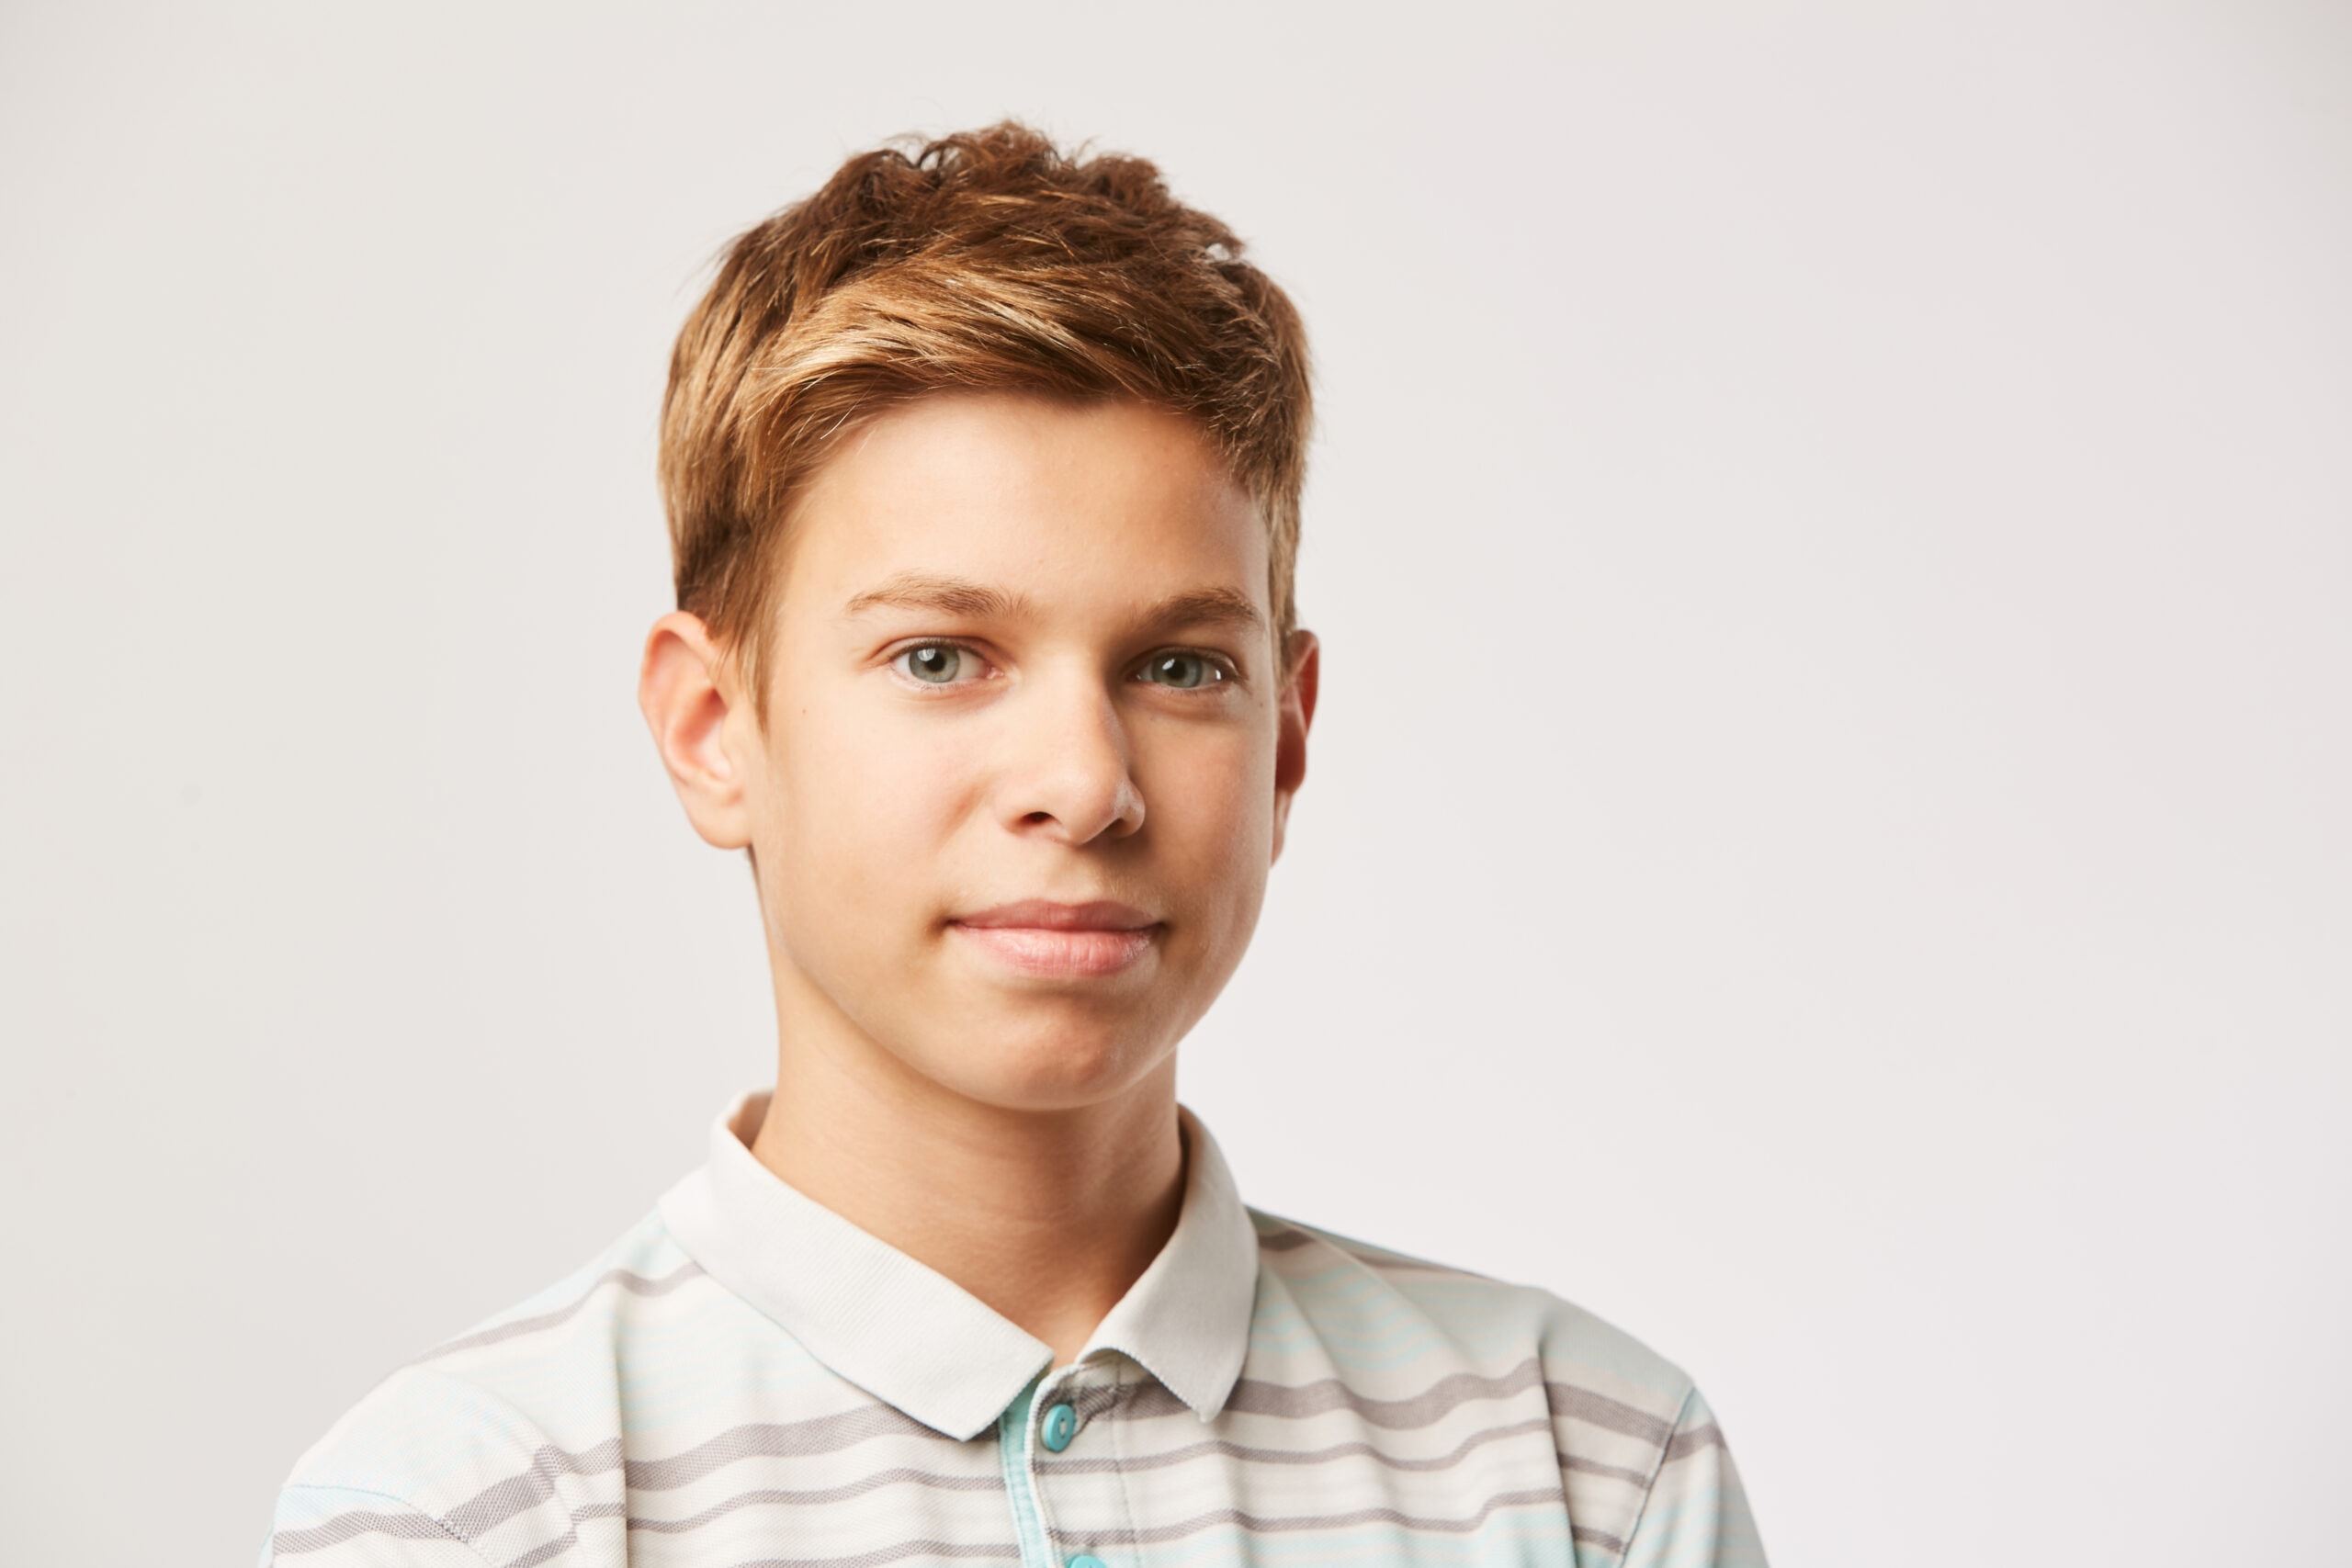 A portrait of a young boy, looking at the camera in front of a white background